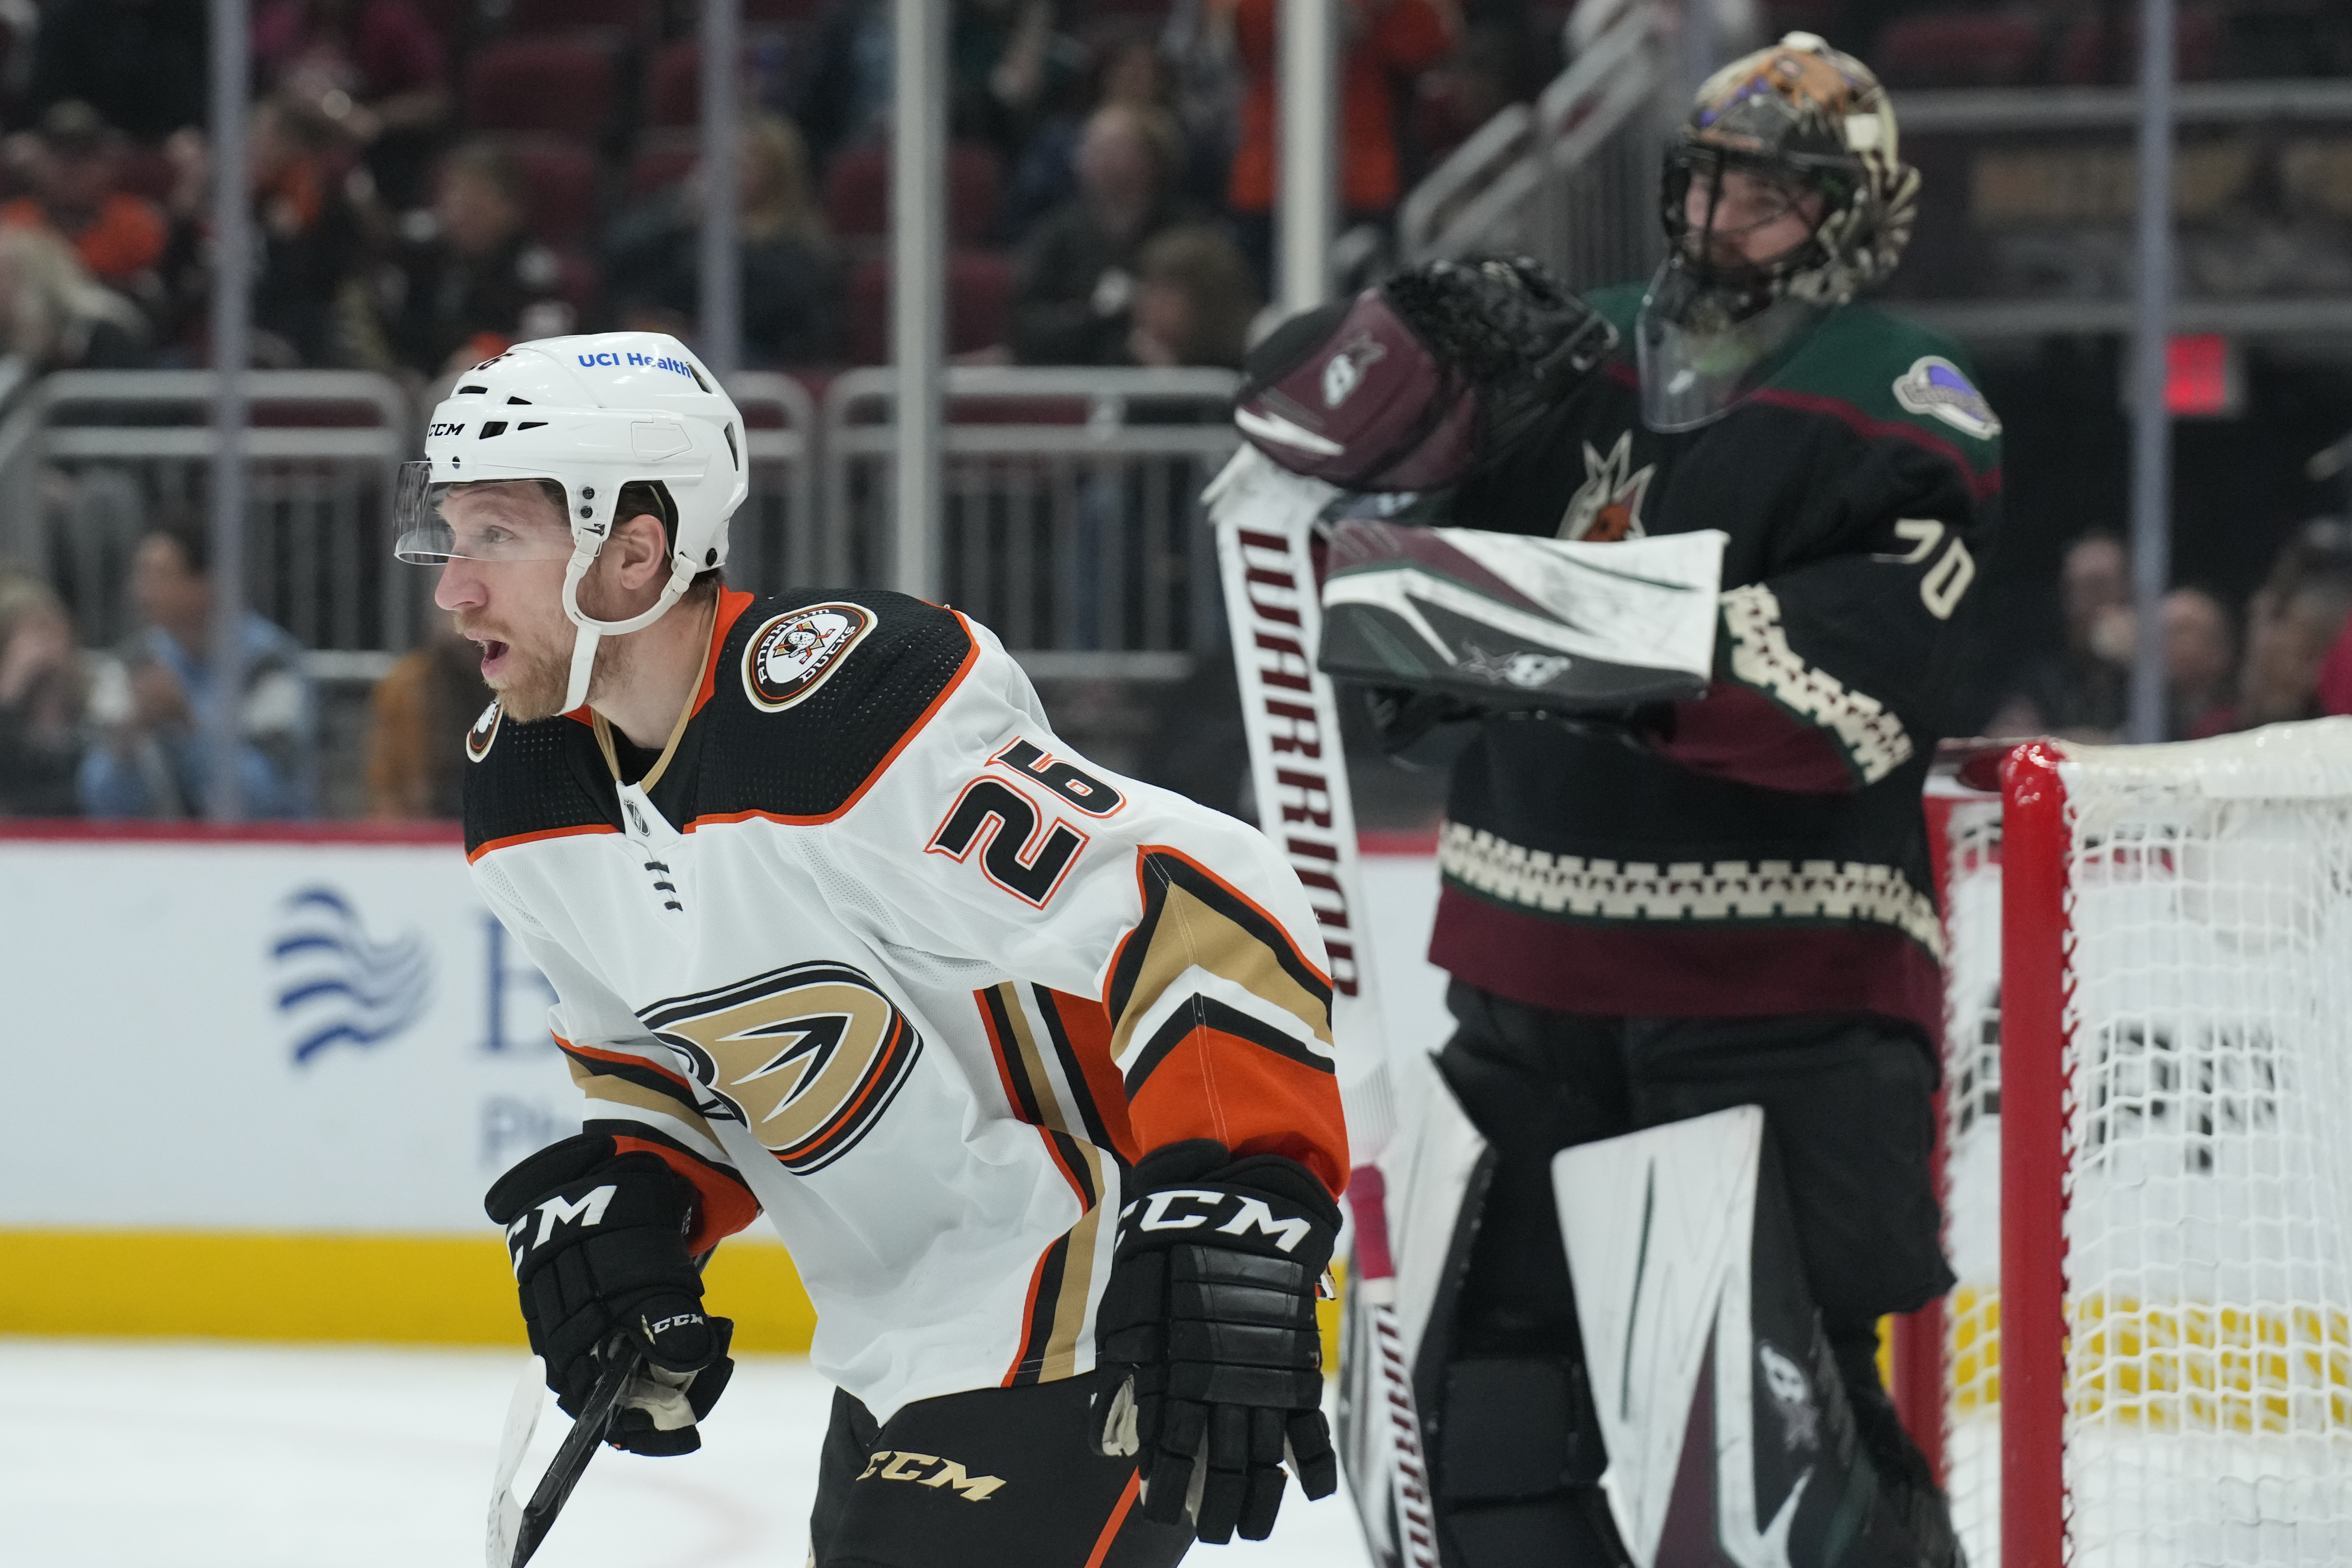 Zegras scores in OT, Ducks top Coyotes for 3rd straight win